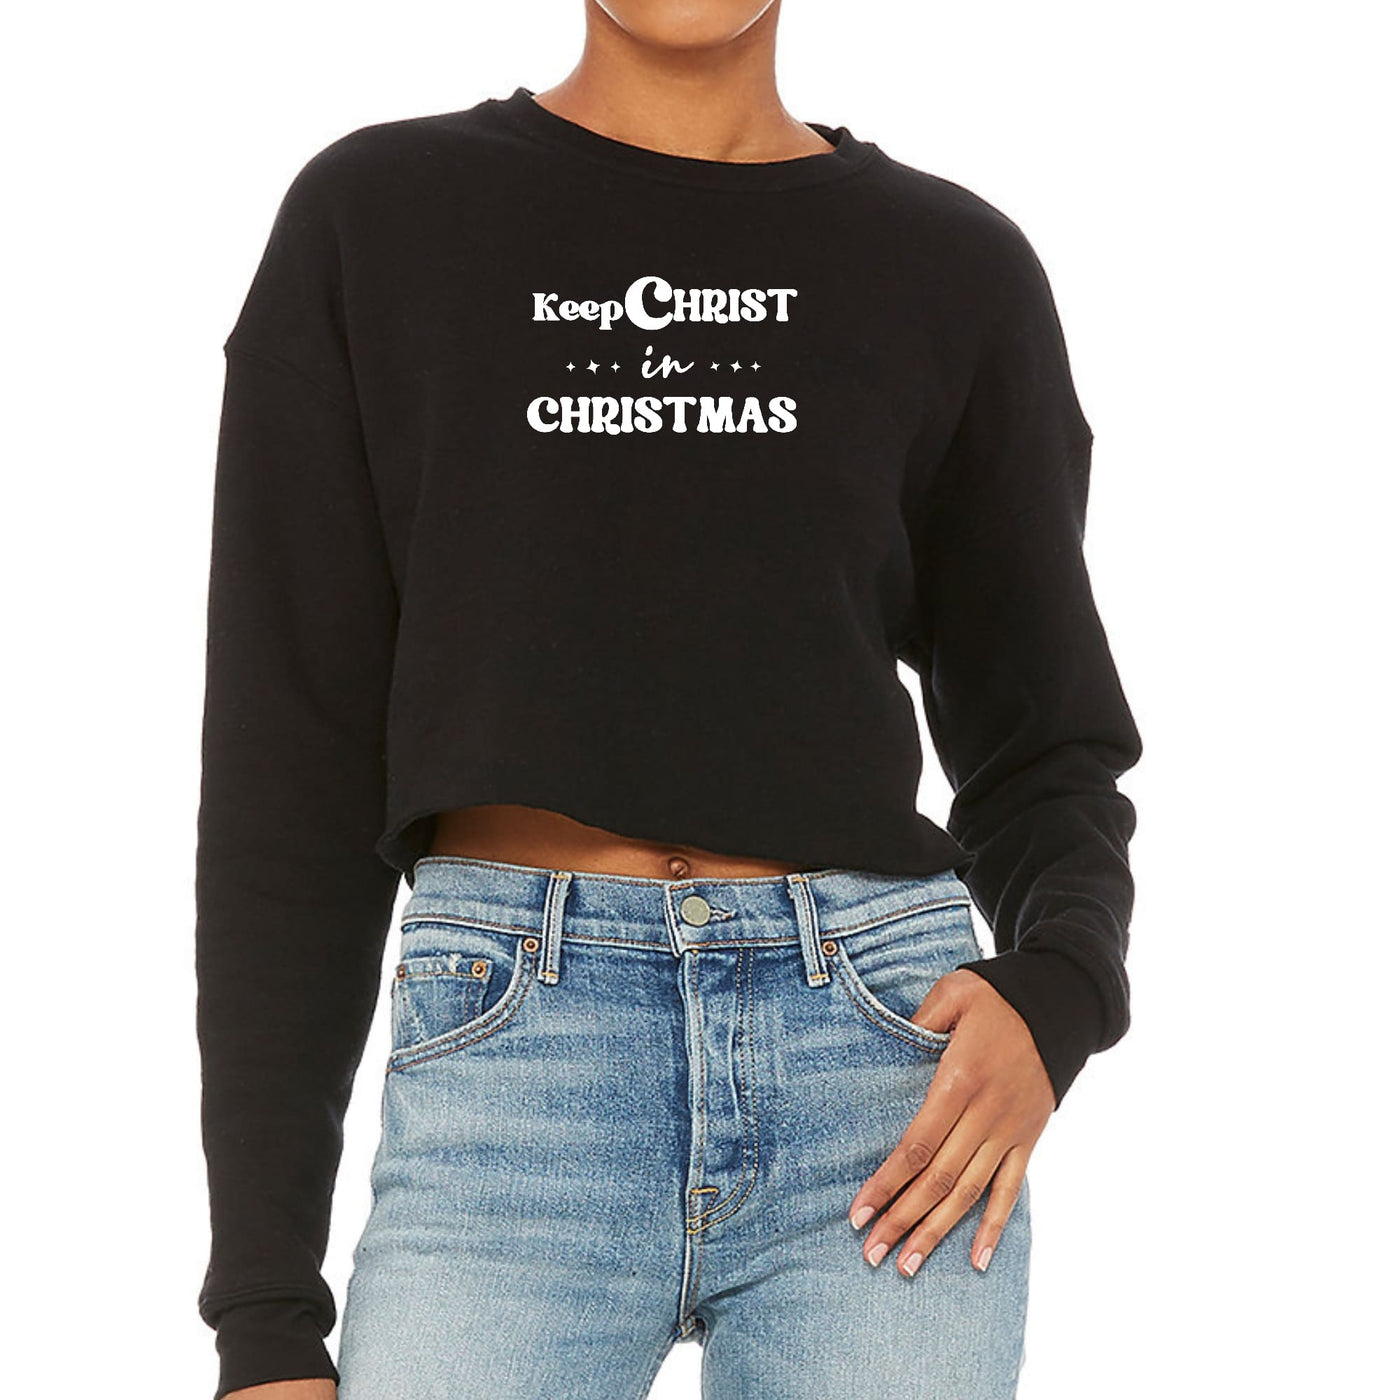 Womens Cropped Graphic Sweatshirt Keep Christ In Christmas Christian